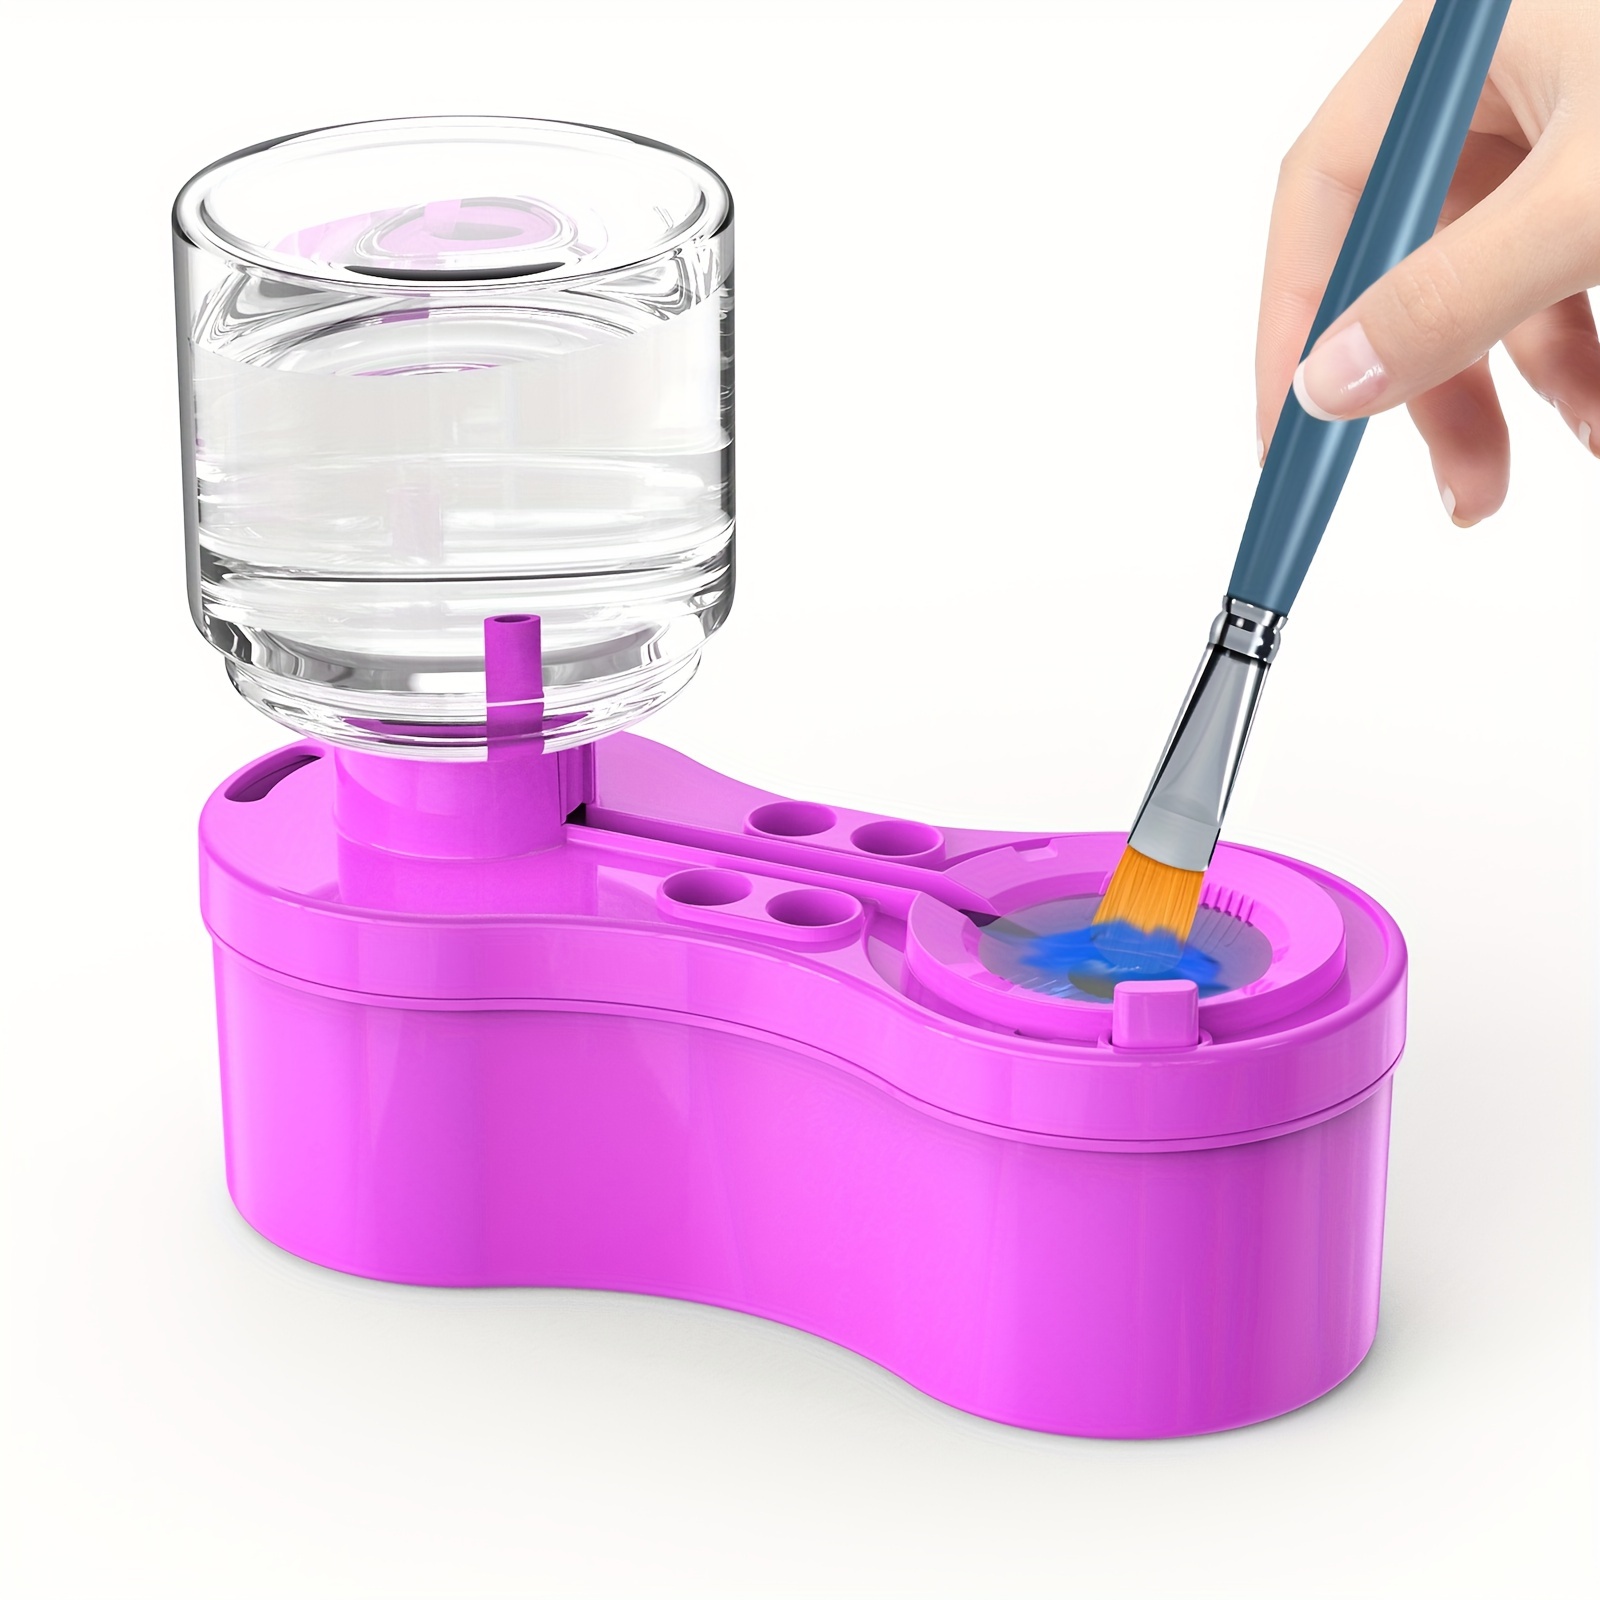 Paint Brush Cleaner Clean Water Cycle brusher cleaner Pen Washer Small  ToiletTool Interested Tool For Children